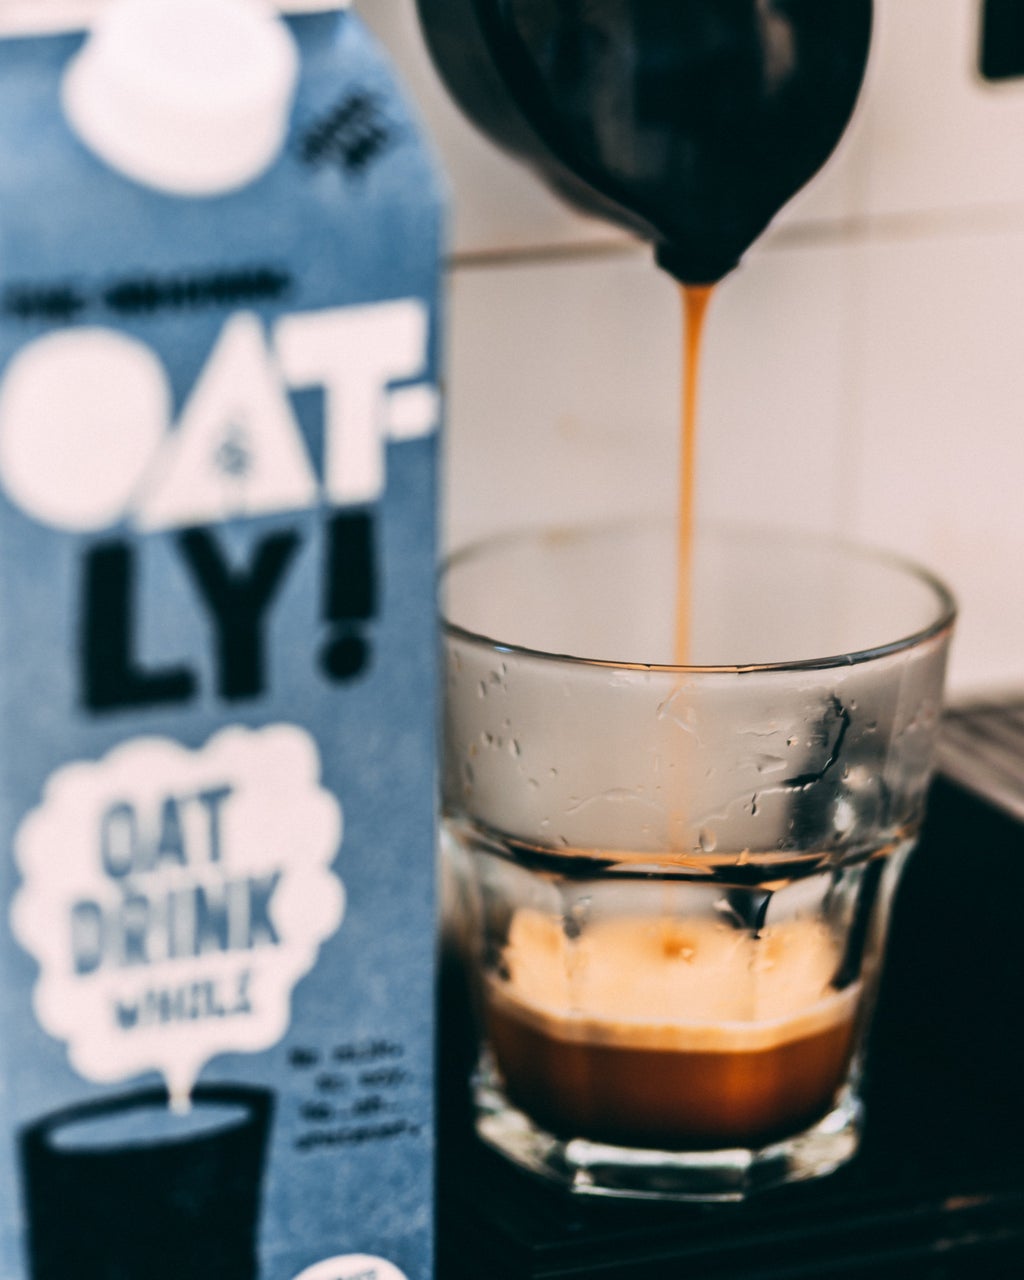 coffee is poured into a glass cup on a counter. there is a carton of oat milk next to it